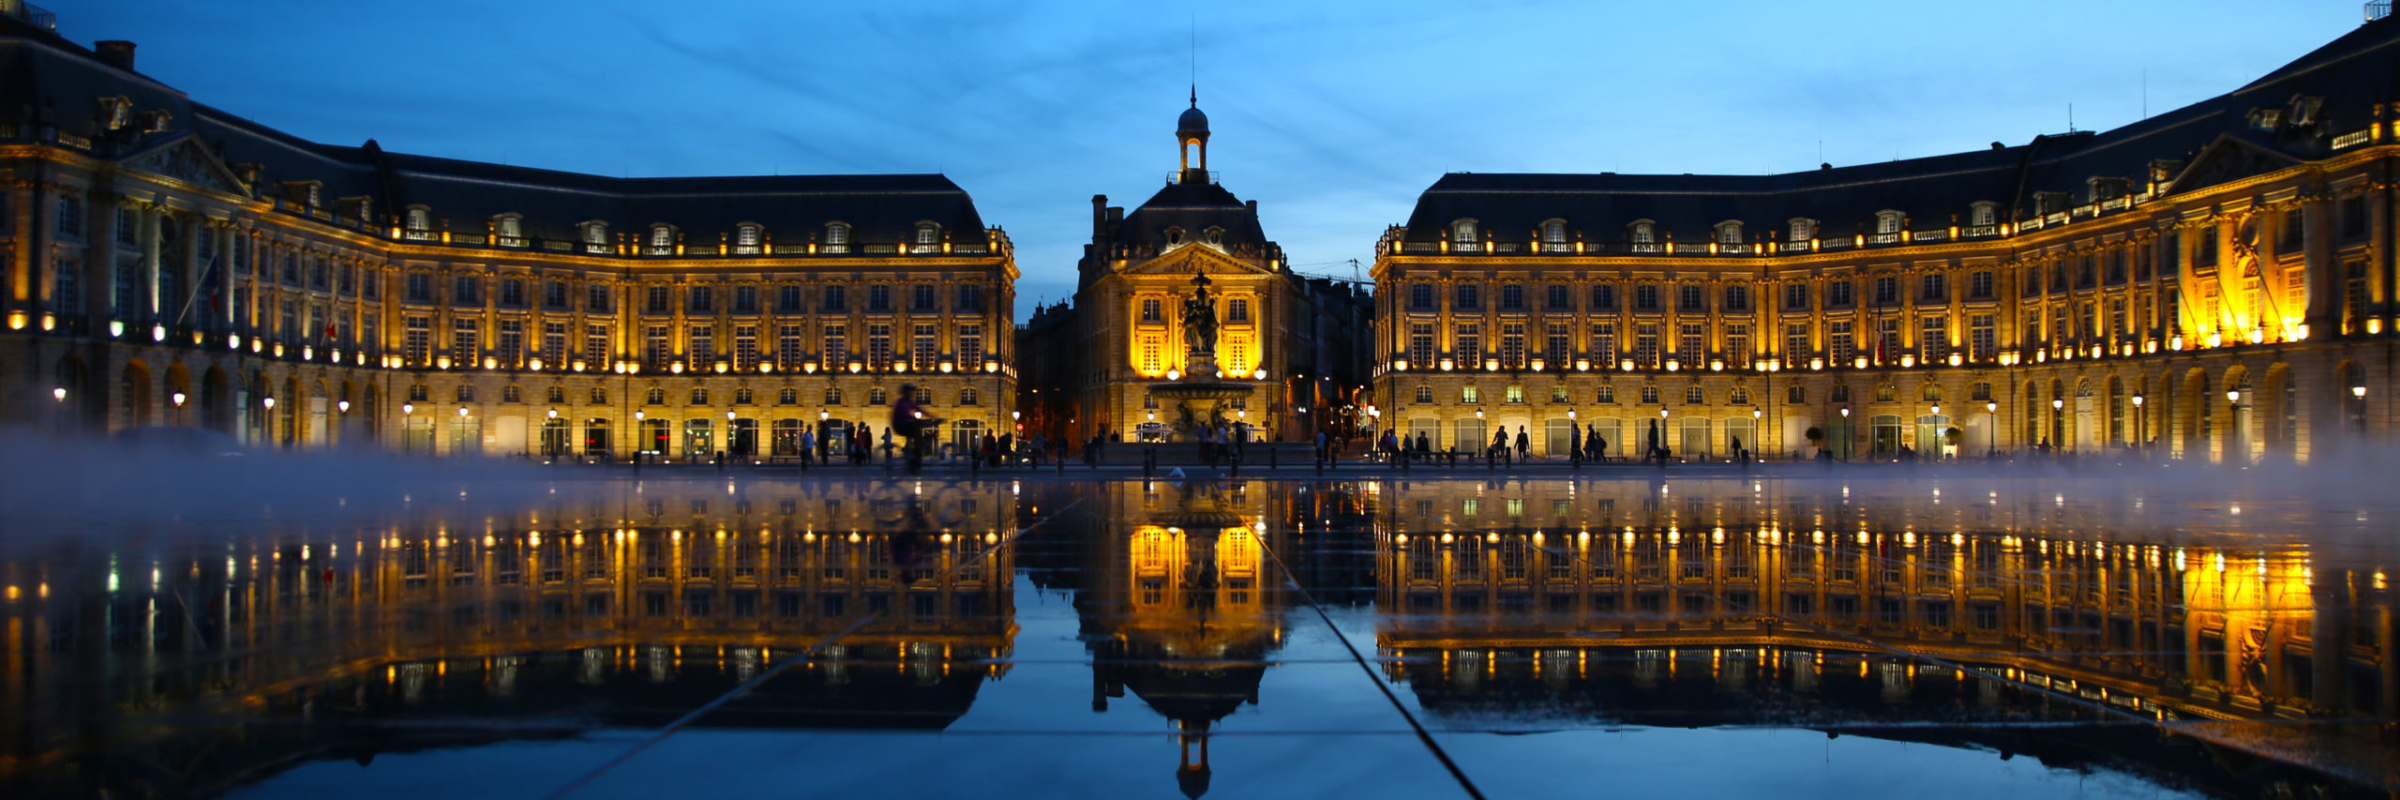 Blue hour at Bordeaux's Water Mirror with the mirror-like surface after the water drains and the mist starting to come on as the Place de la Borse is light up and reflects on the mirror